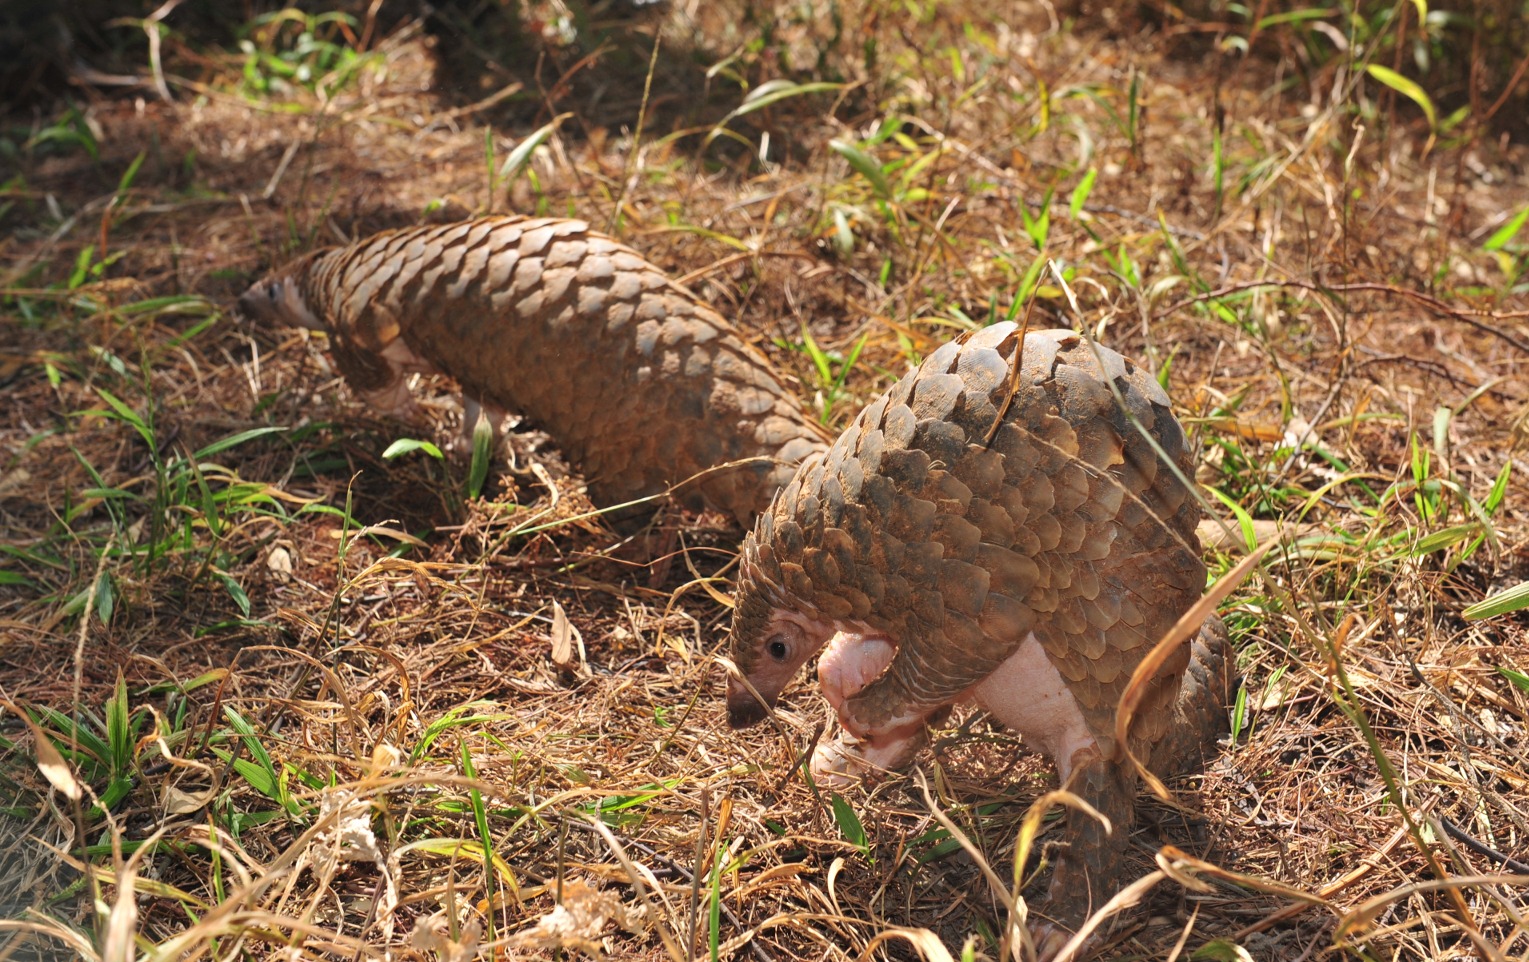 Seizures show scale of pangolin peril | University of Oxford1529 x 962